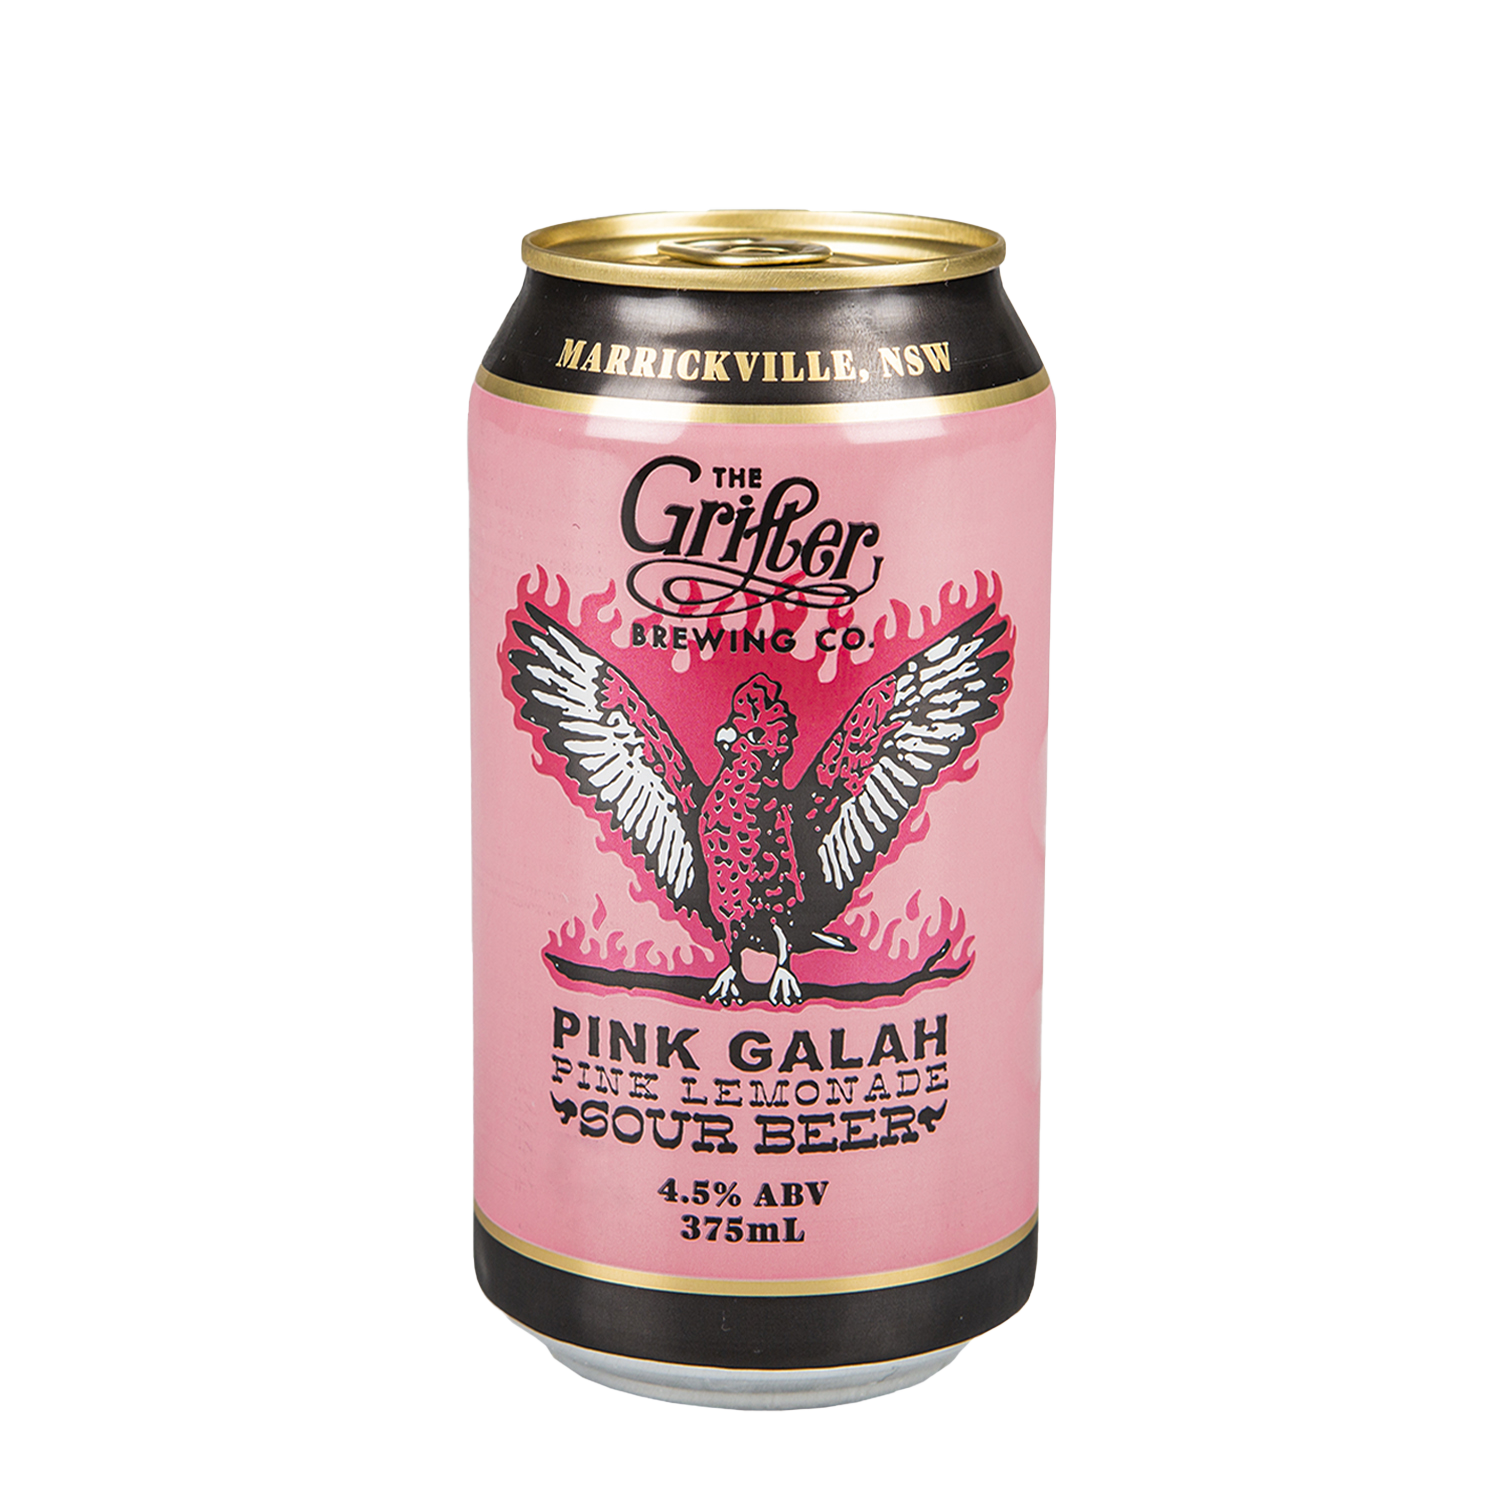 The Grifter Brewing Co